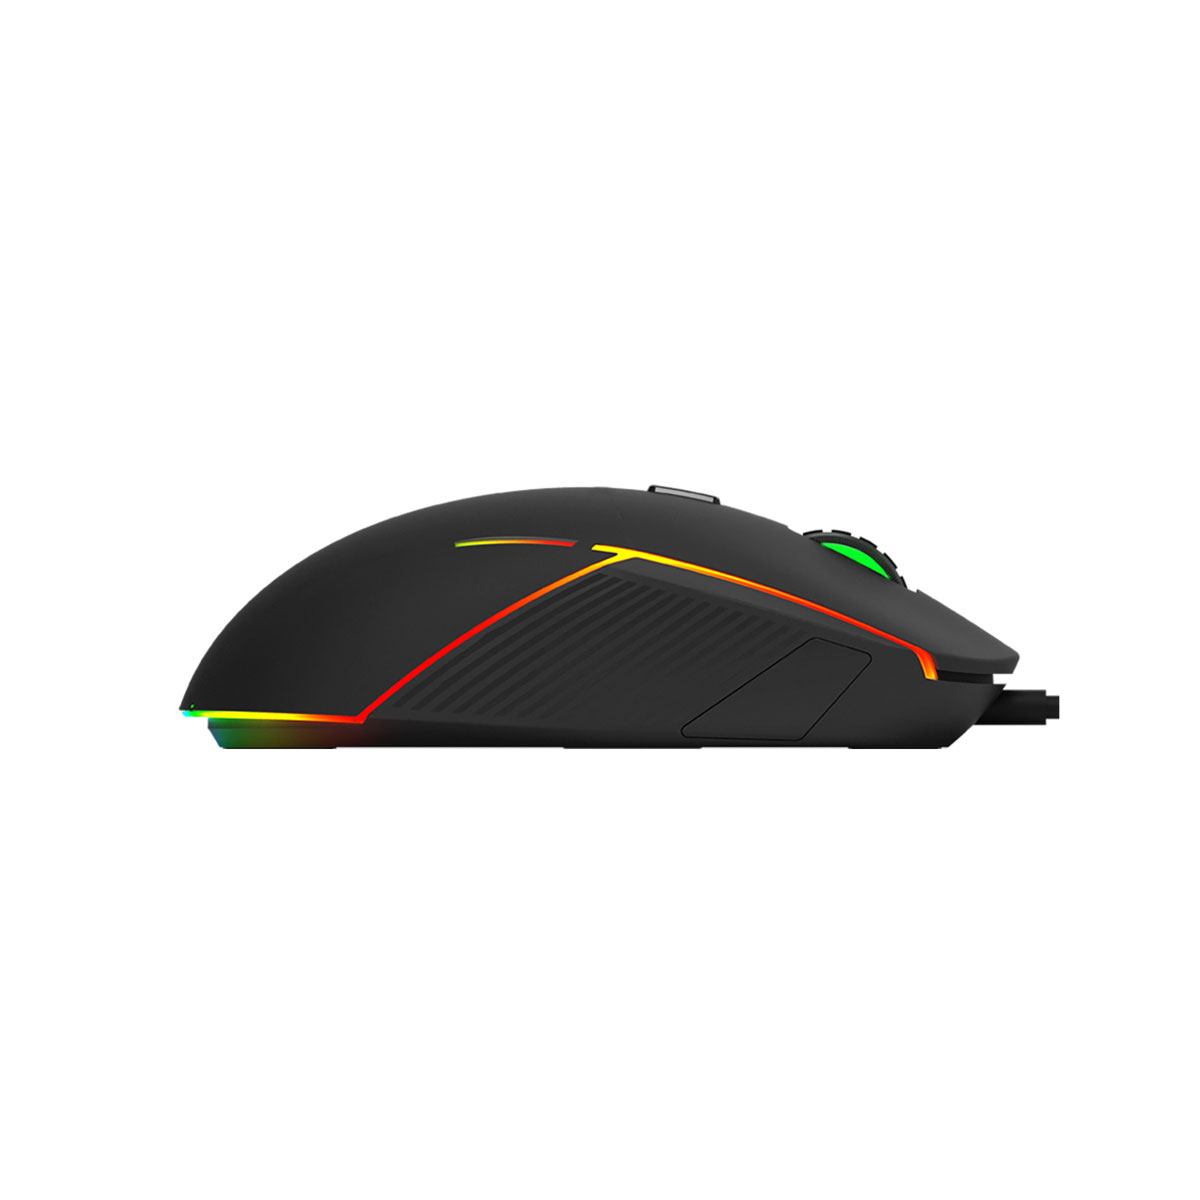 g924-mouse-04